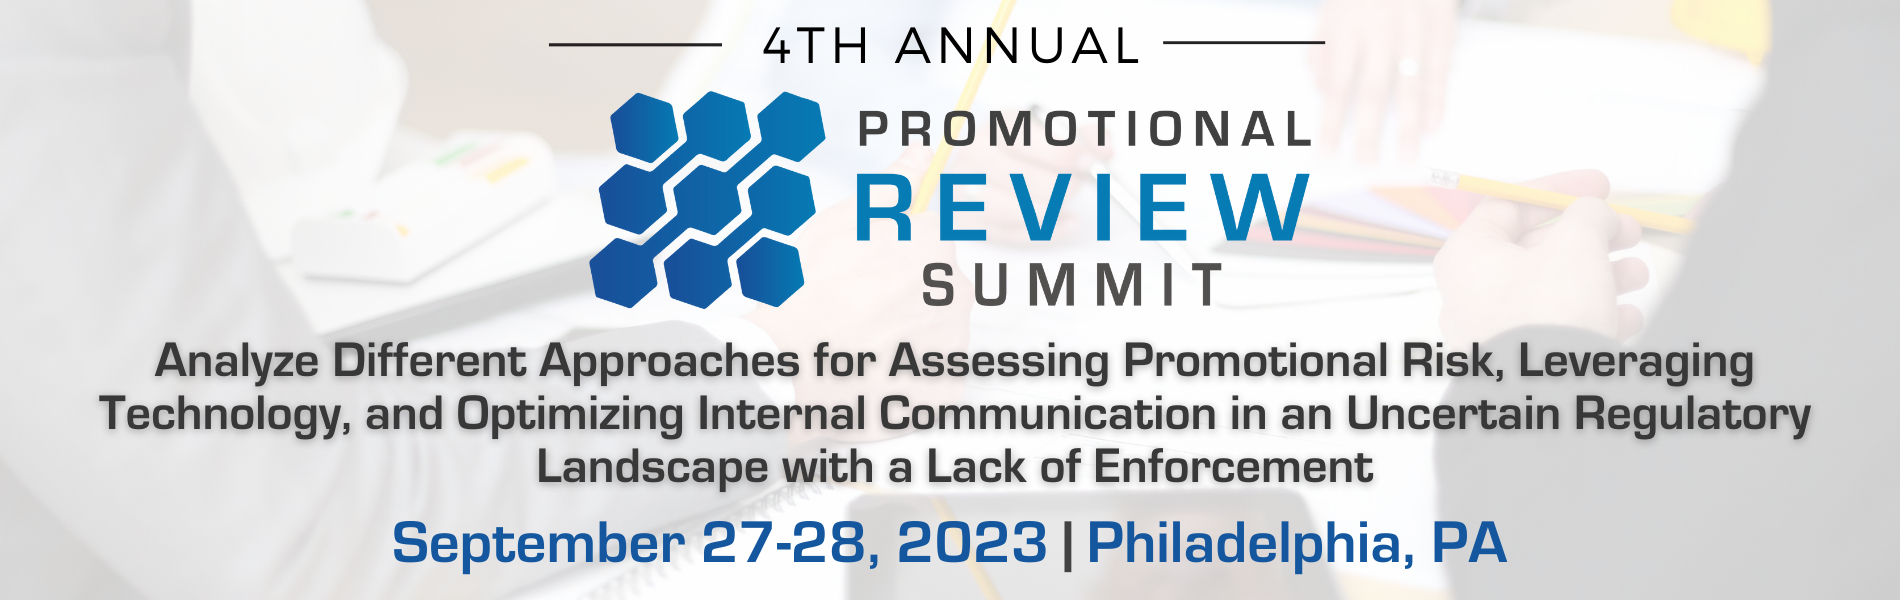 Hero banner for 4TH Annual, Promotional Review Summit